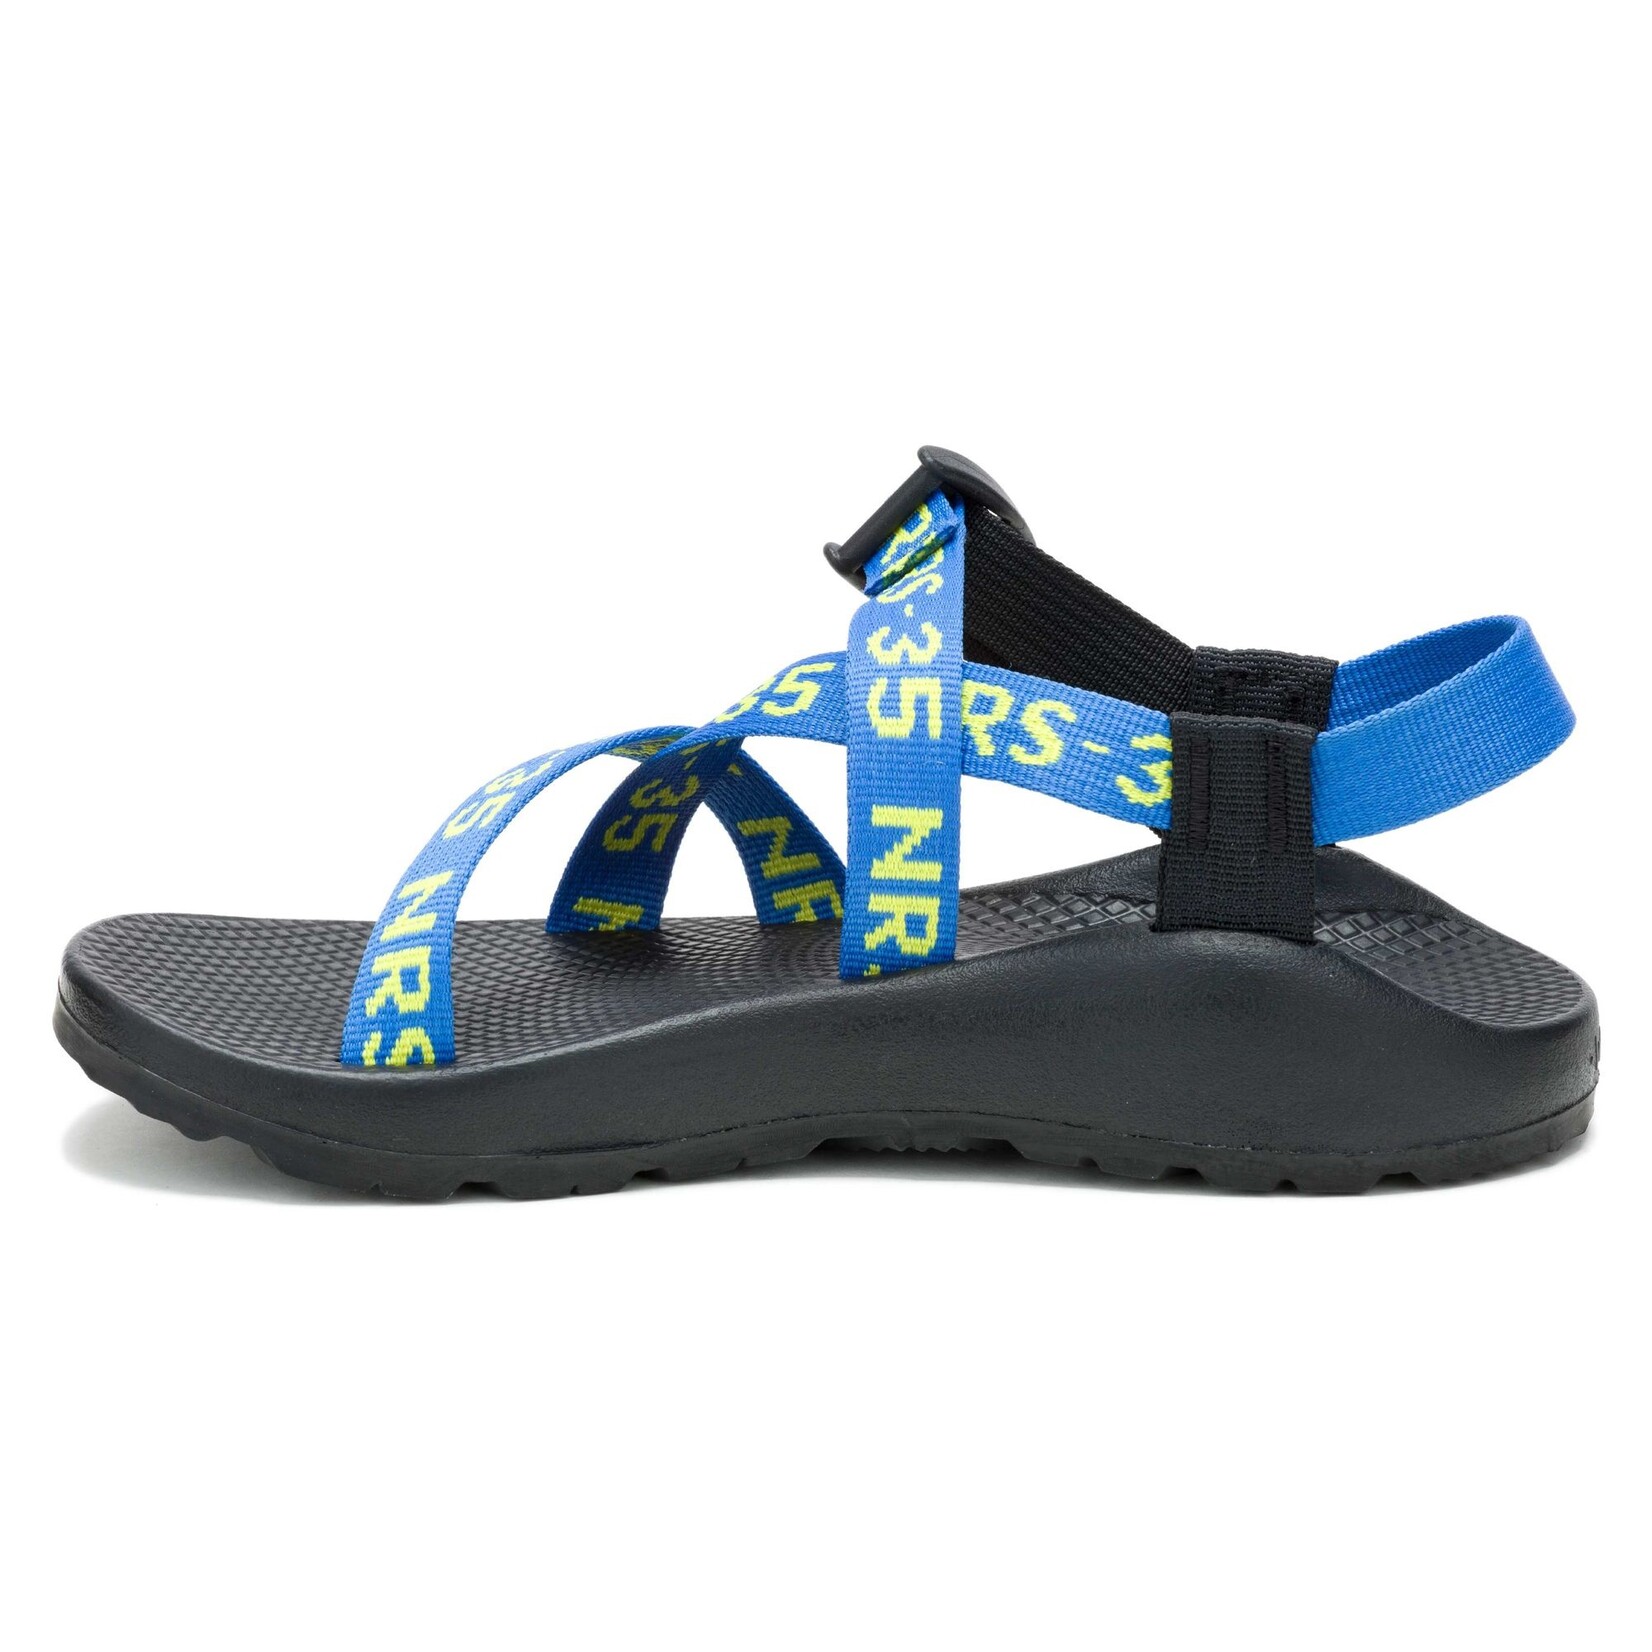 Chaco NRS + Chaco Women's Z/1 Classic Sandals